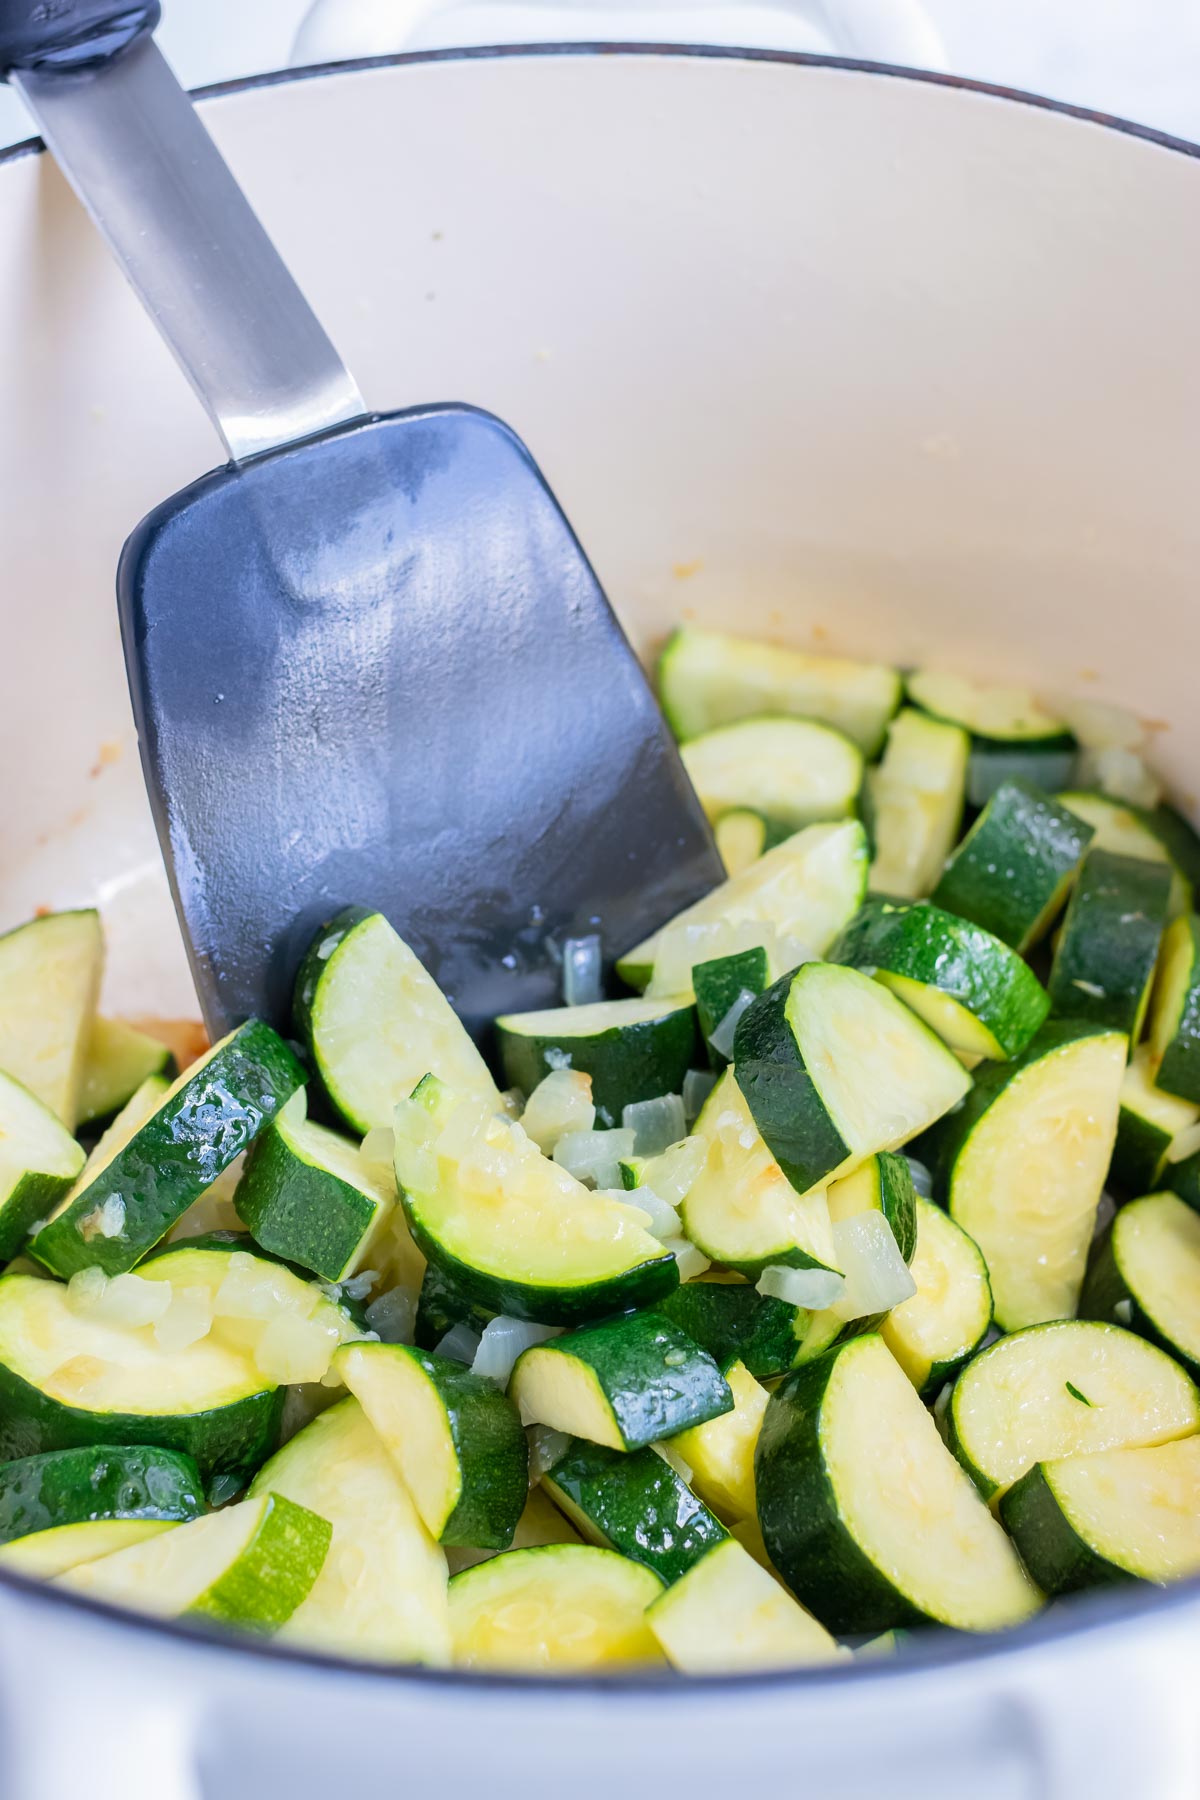 Zucchini slices are sautéed on the stove.